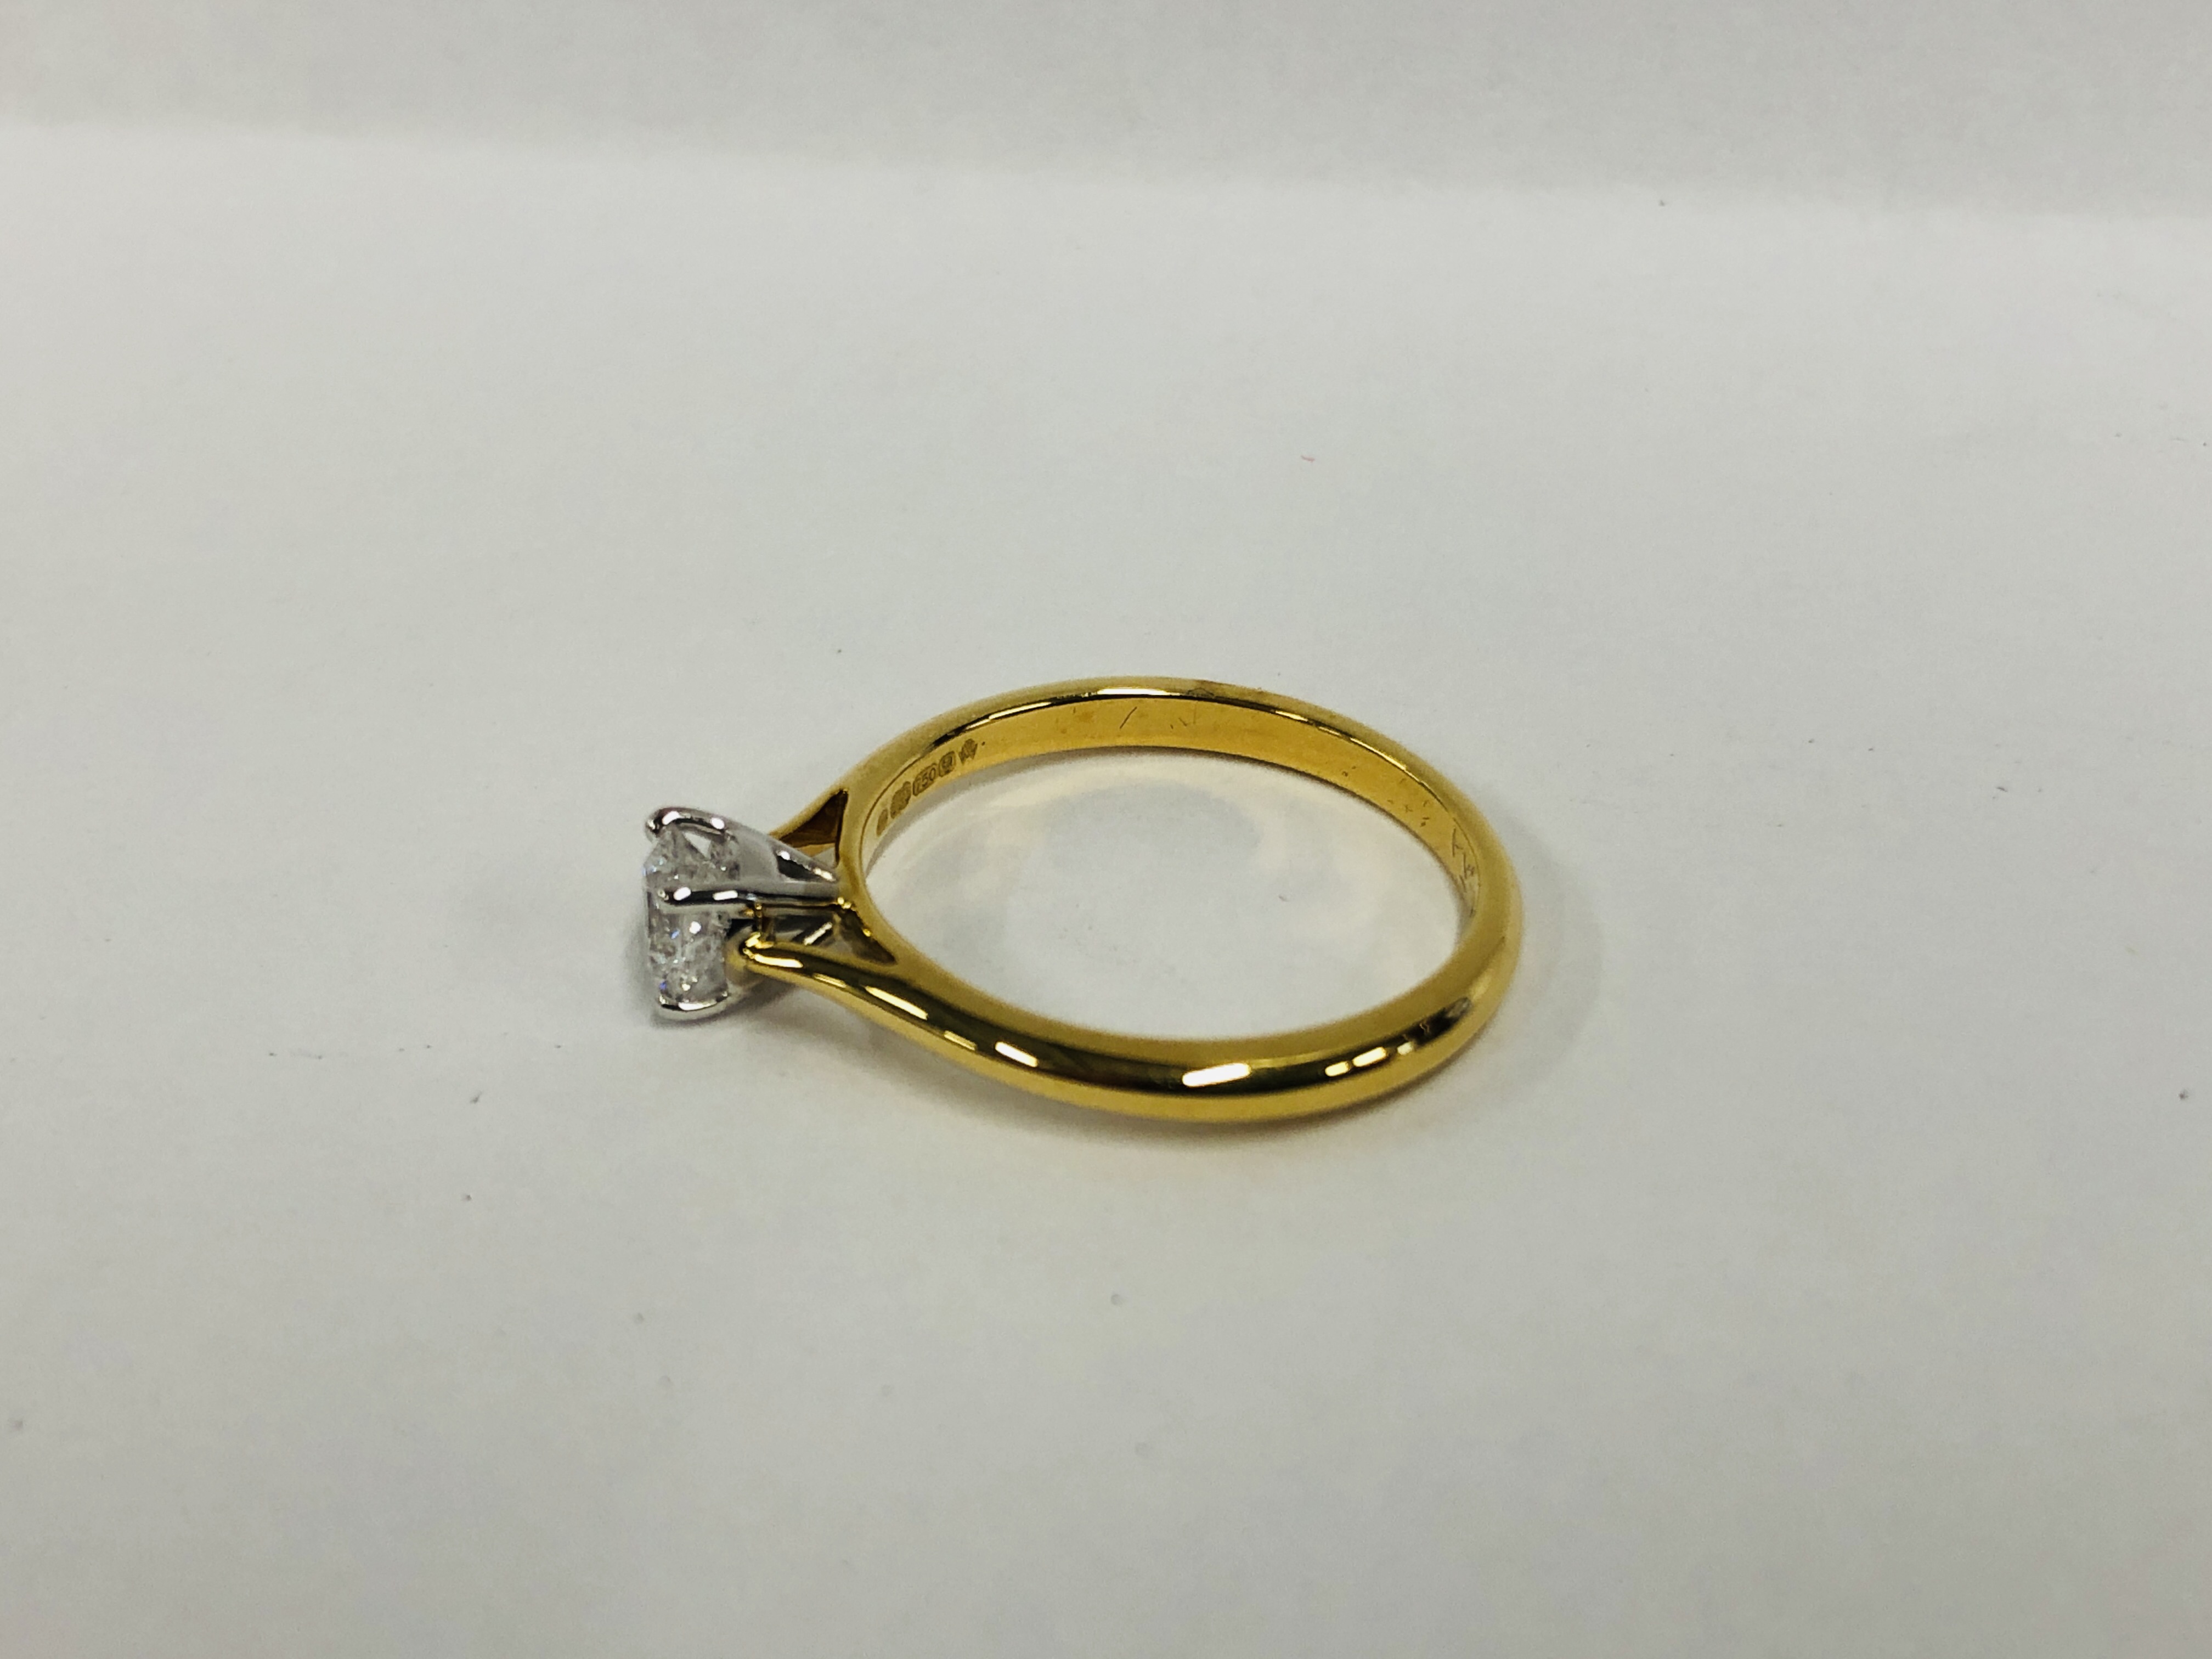 A MODERN MAPPIN & WEBB 18CT YELLOW GOLD SOLITAIRE BRILLIANT CUT DIAMOND RING SIZE O/P WITH ORIGINAL - Image 3 of 9